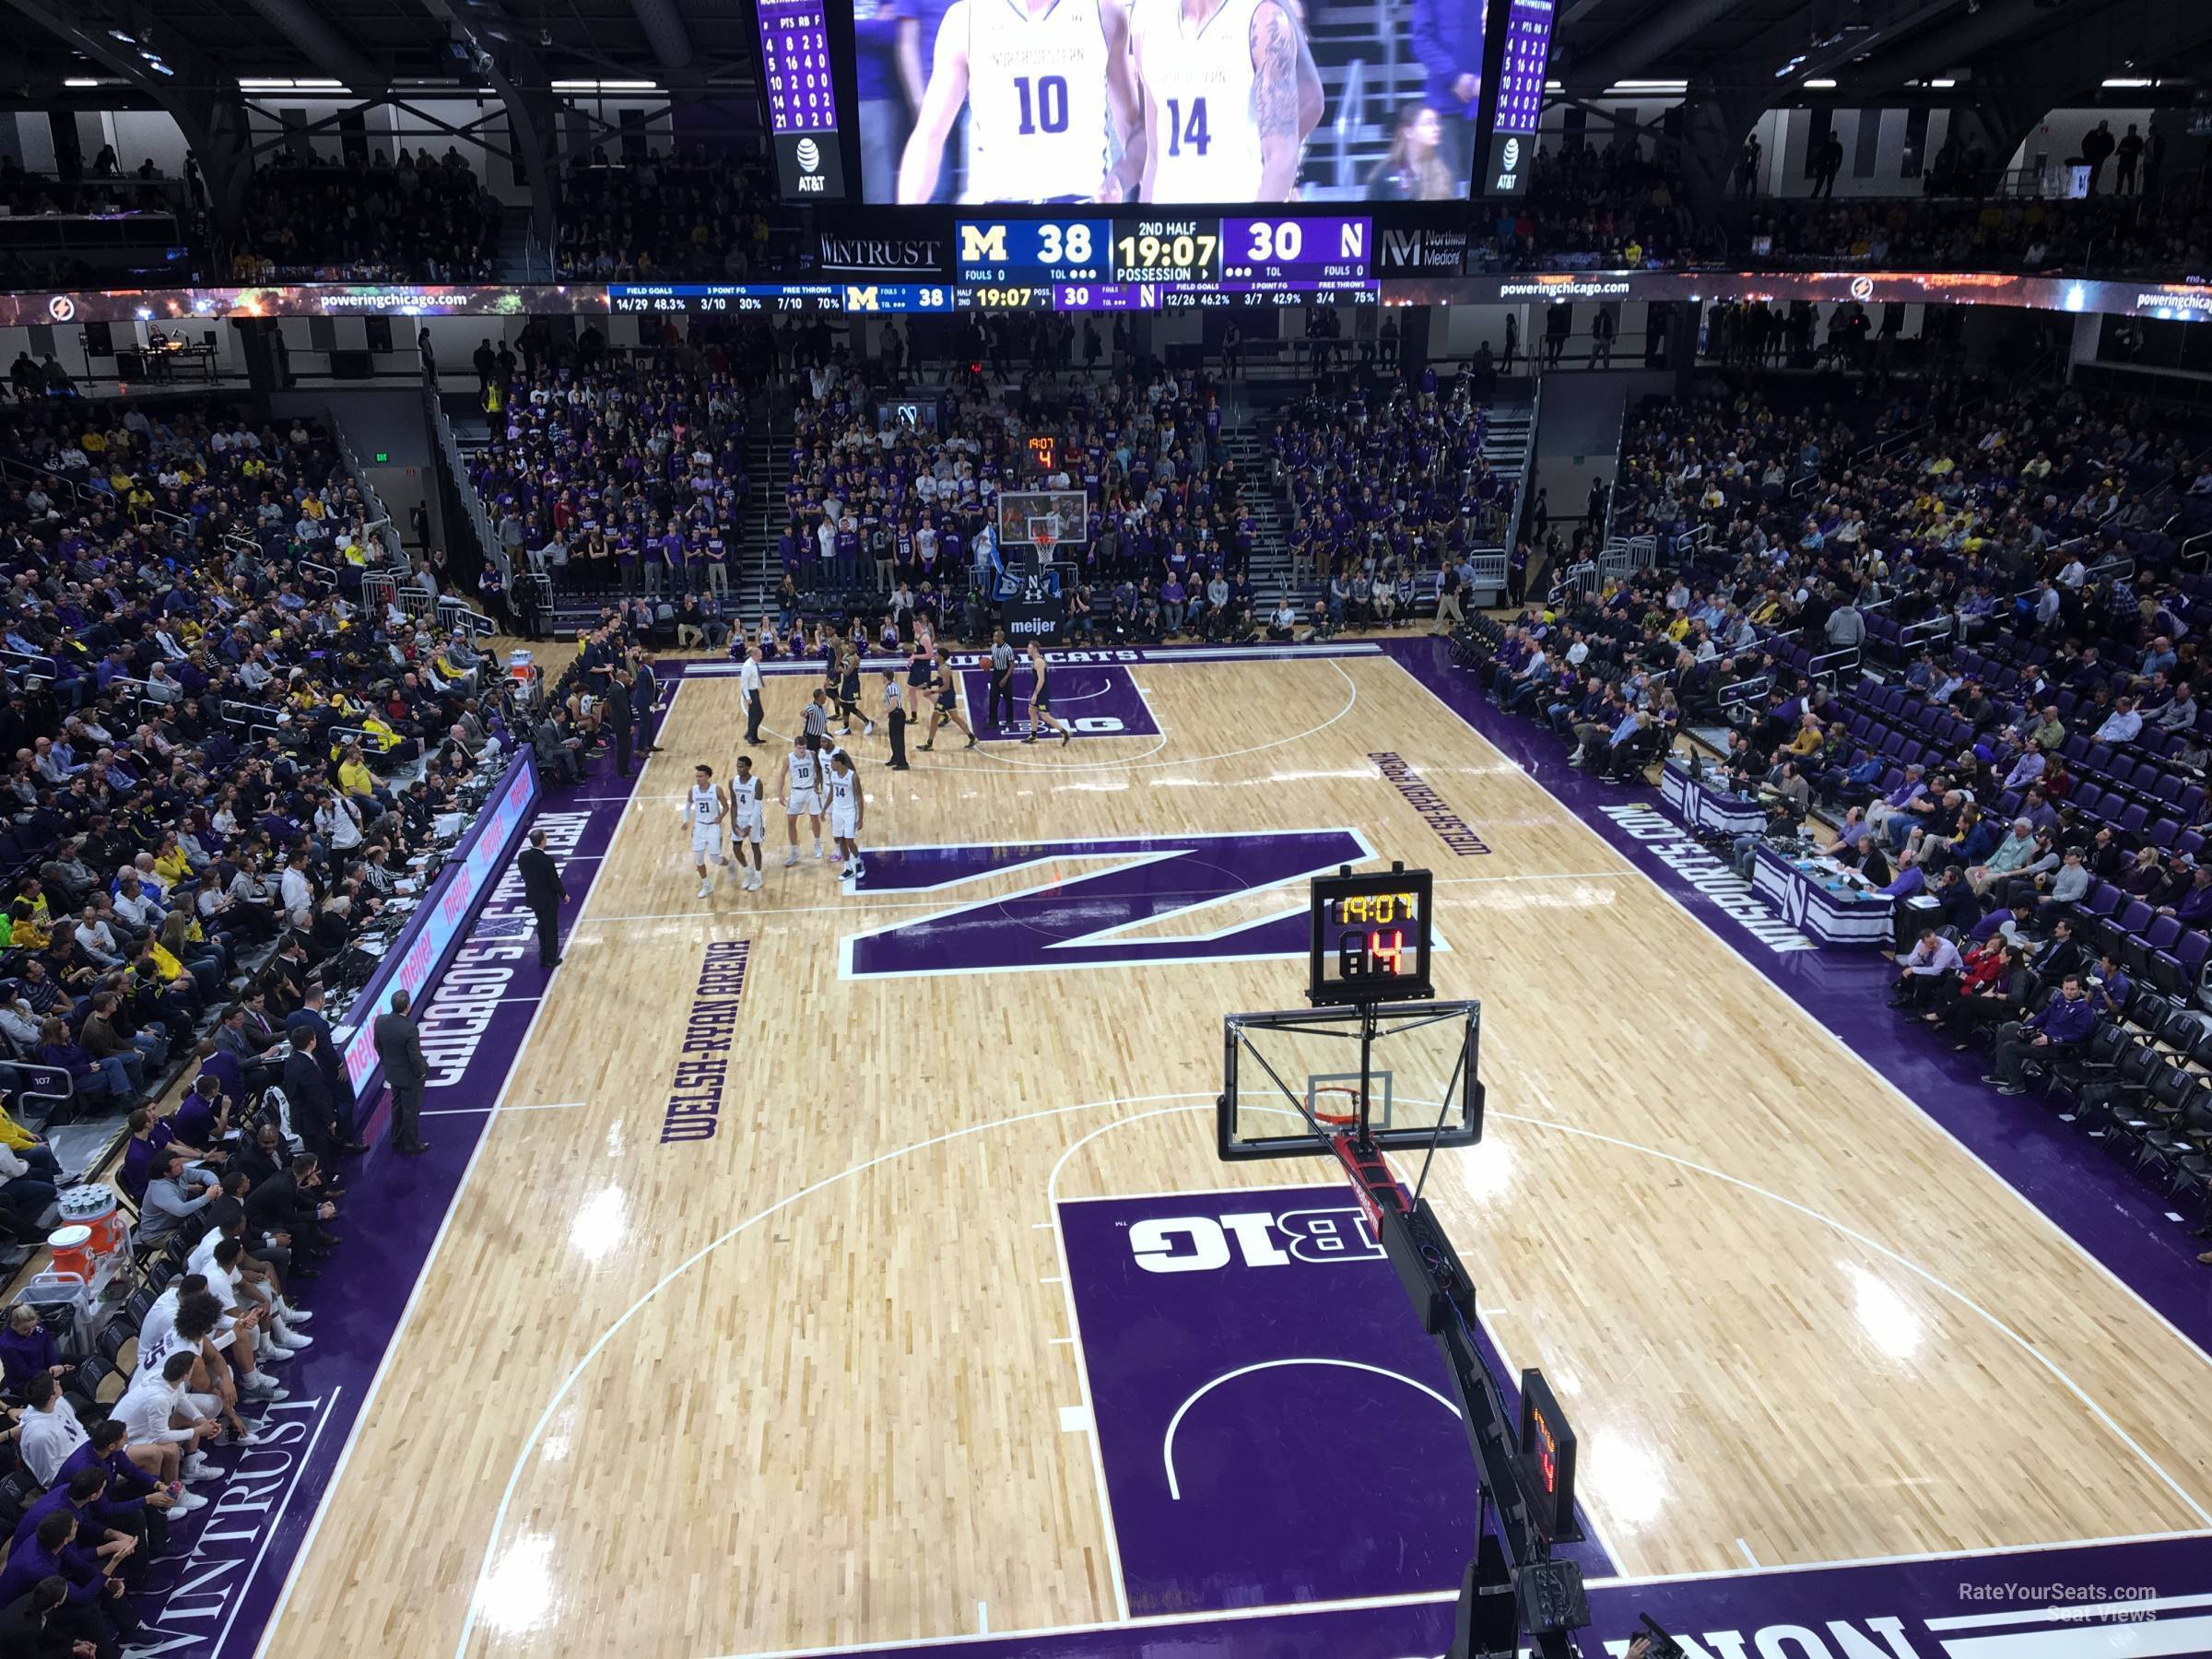 section 204, row 1 seat view  - welsh-ryan arena